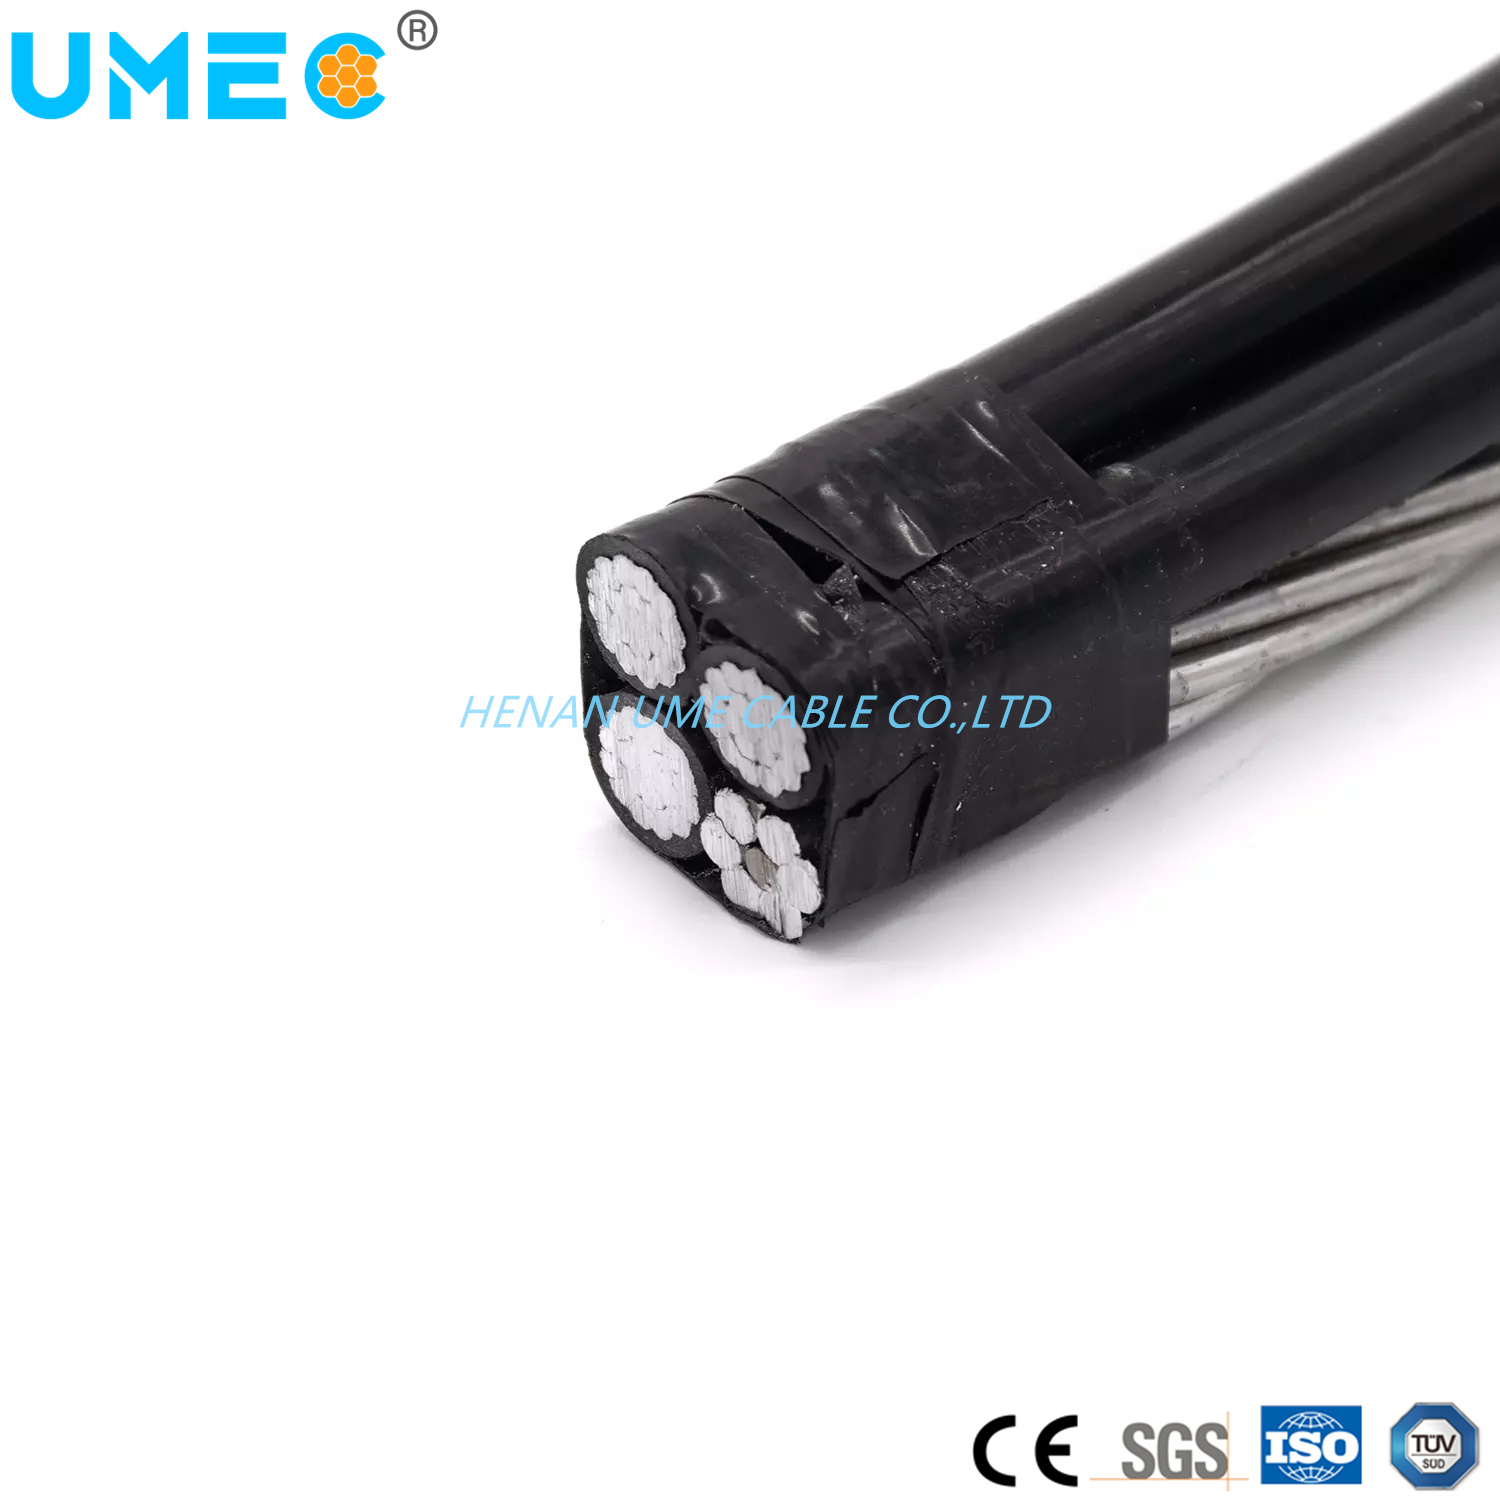 2022 Utility Overhead Aerial Bundled Cable 4AWG 2AWG 1/0AWG 2/0AWG 3/0AWG 4/0AWG Quadruplex Service Drop Cable